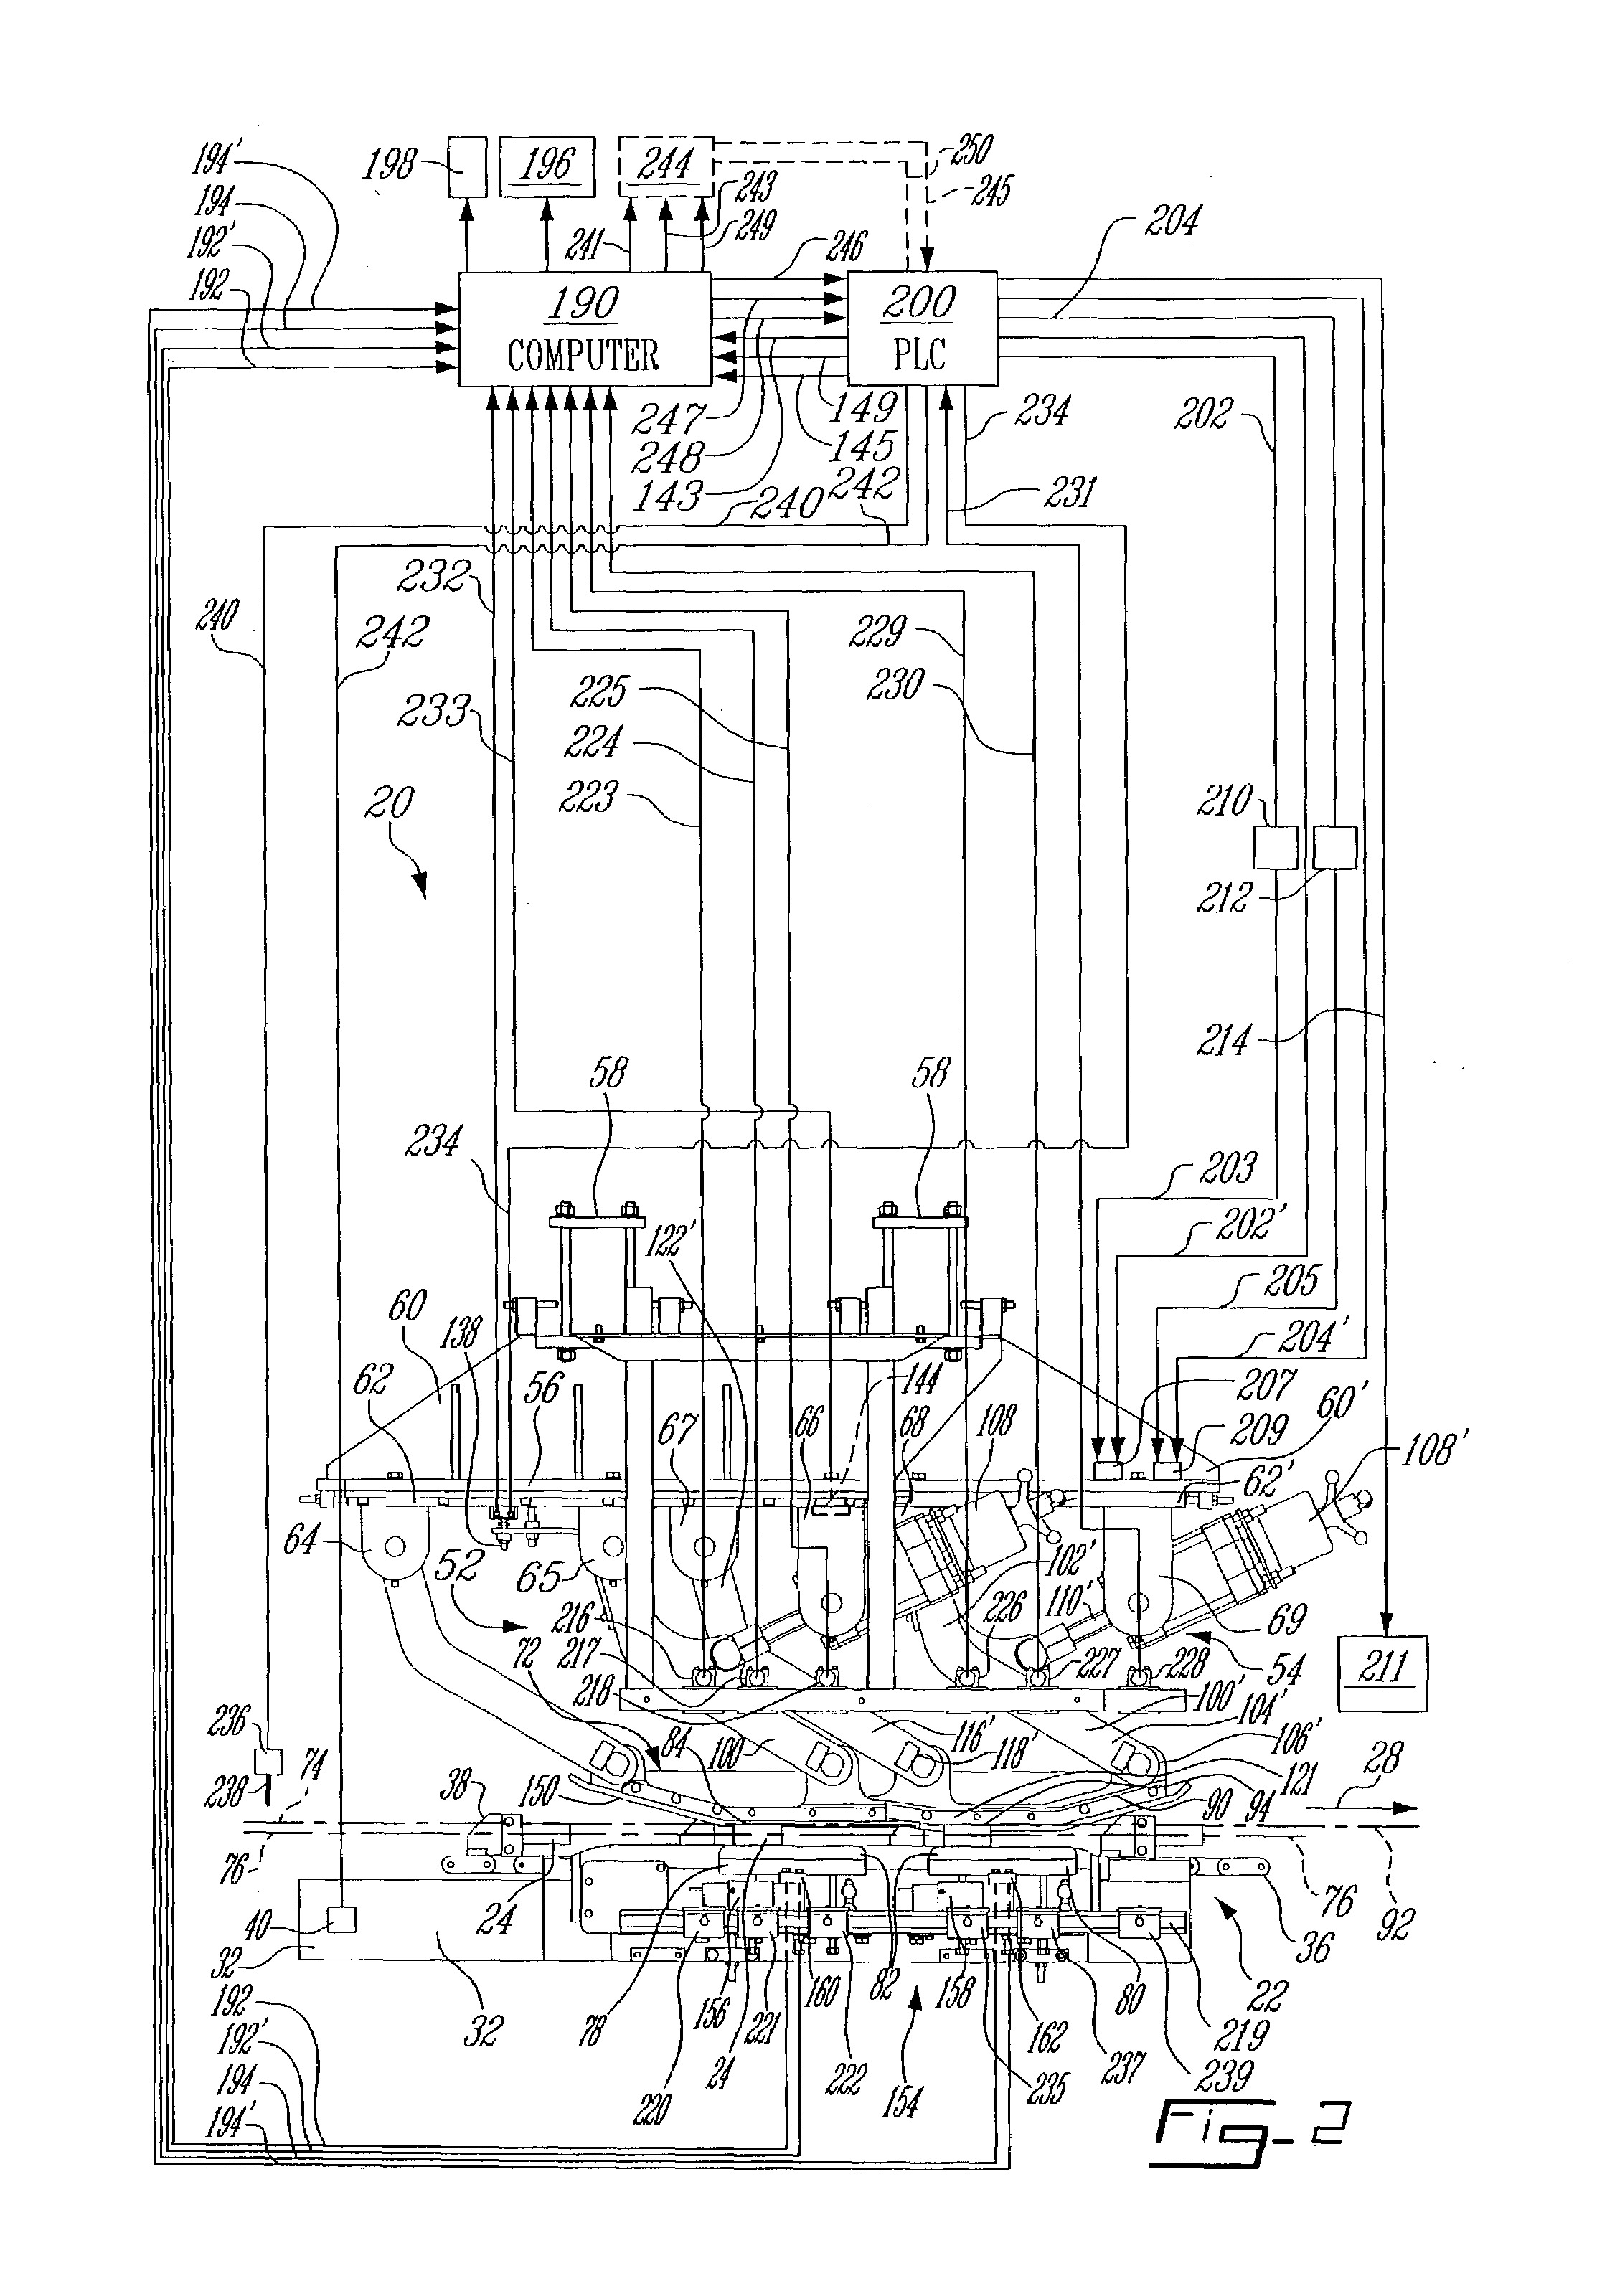 Apparatus and method for testing stiffness of articles